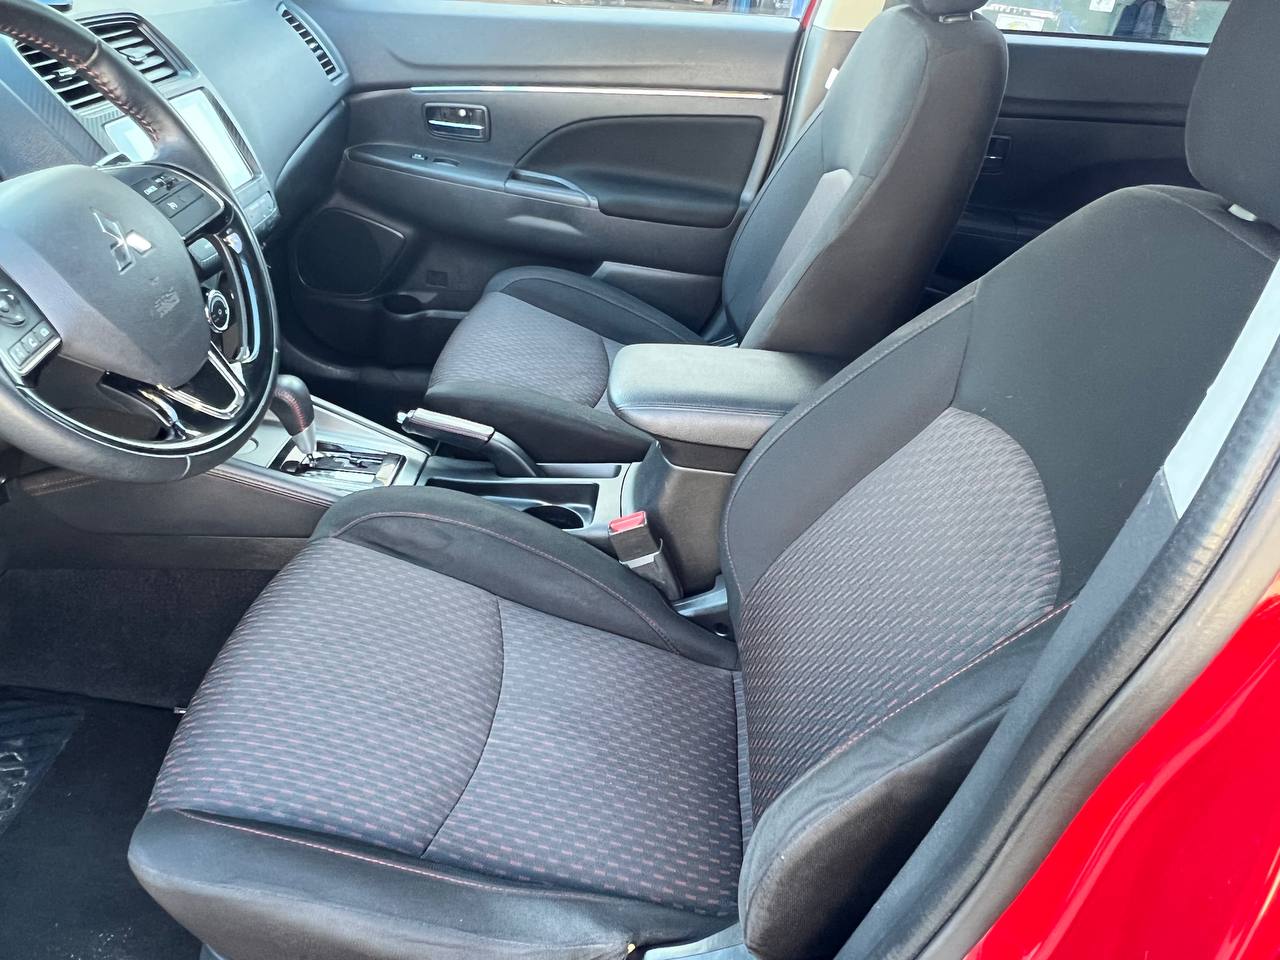 Used - Mitsubishi Outlander Sport SP Wagon for sale in Staten Island NY